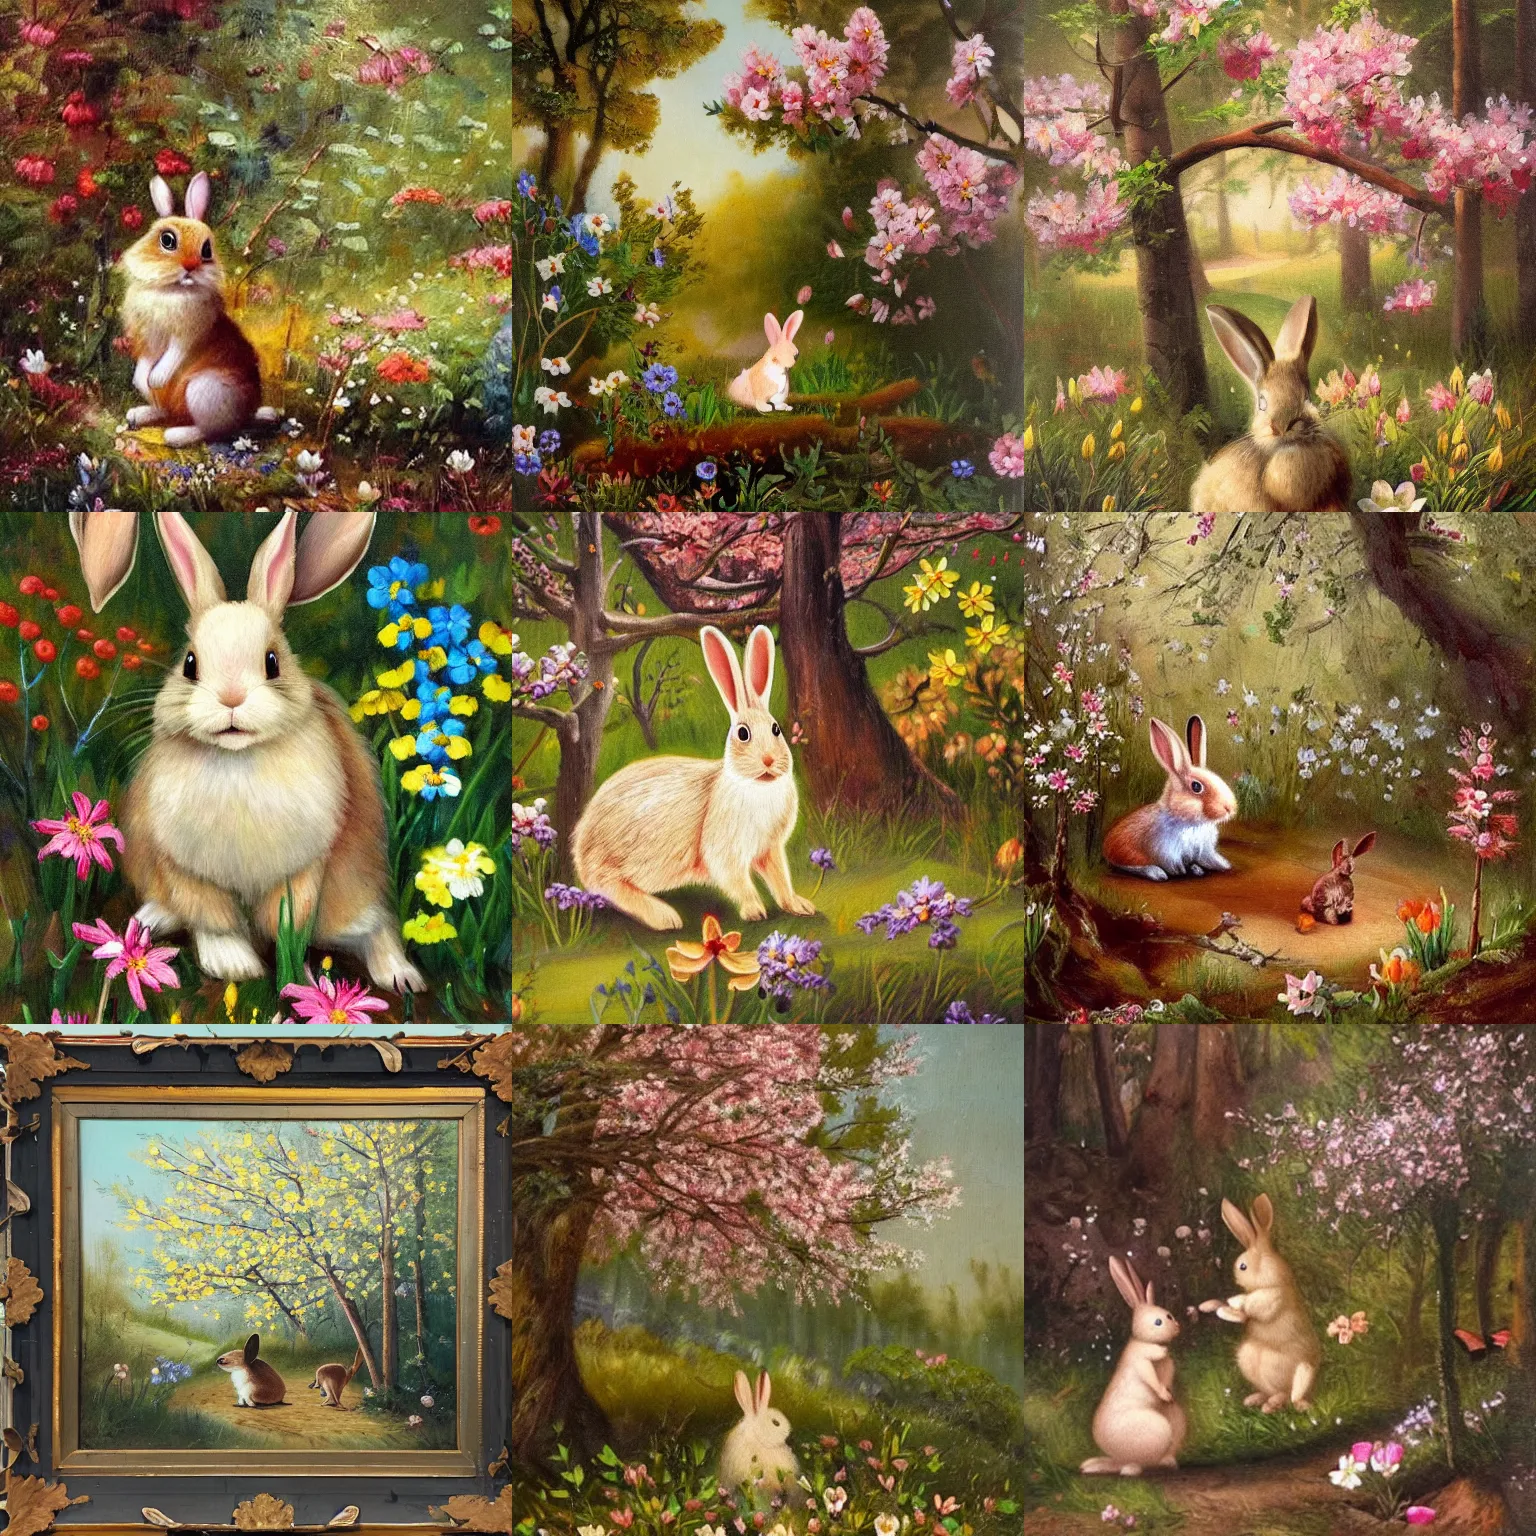 Prompt: The first day of spring. The woods are in bloom, and a rabbit has found some flowers. Captivating oil painting of unknown origin